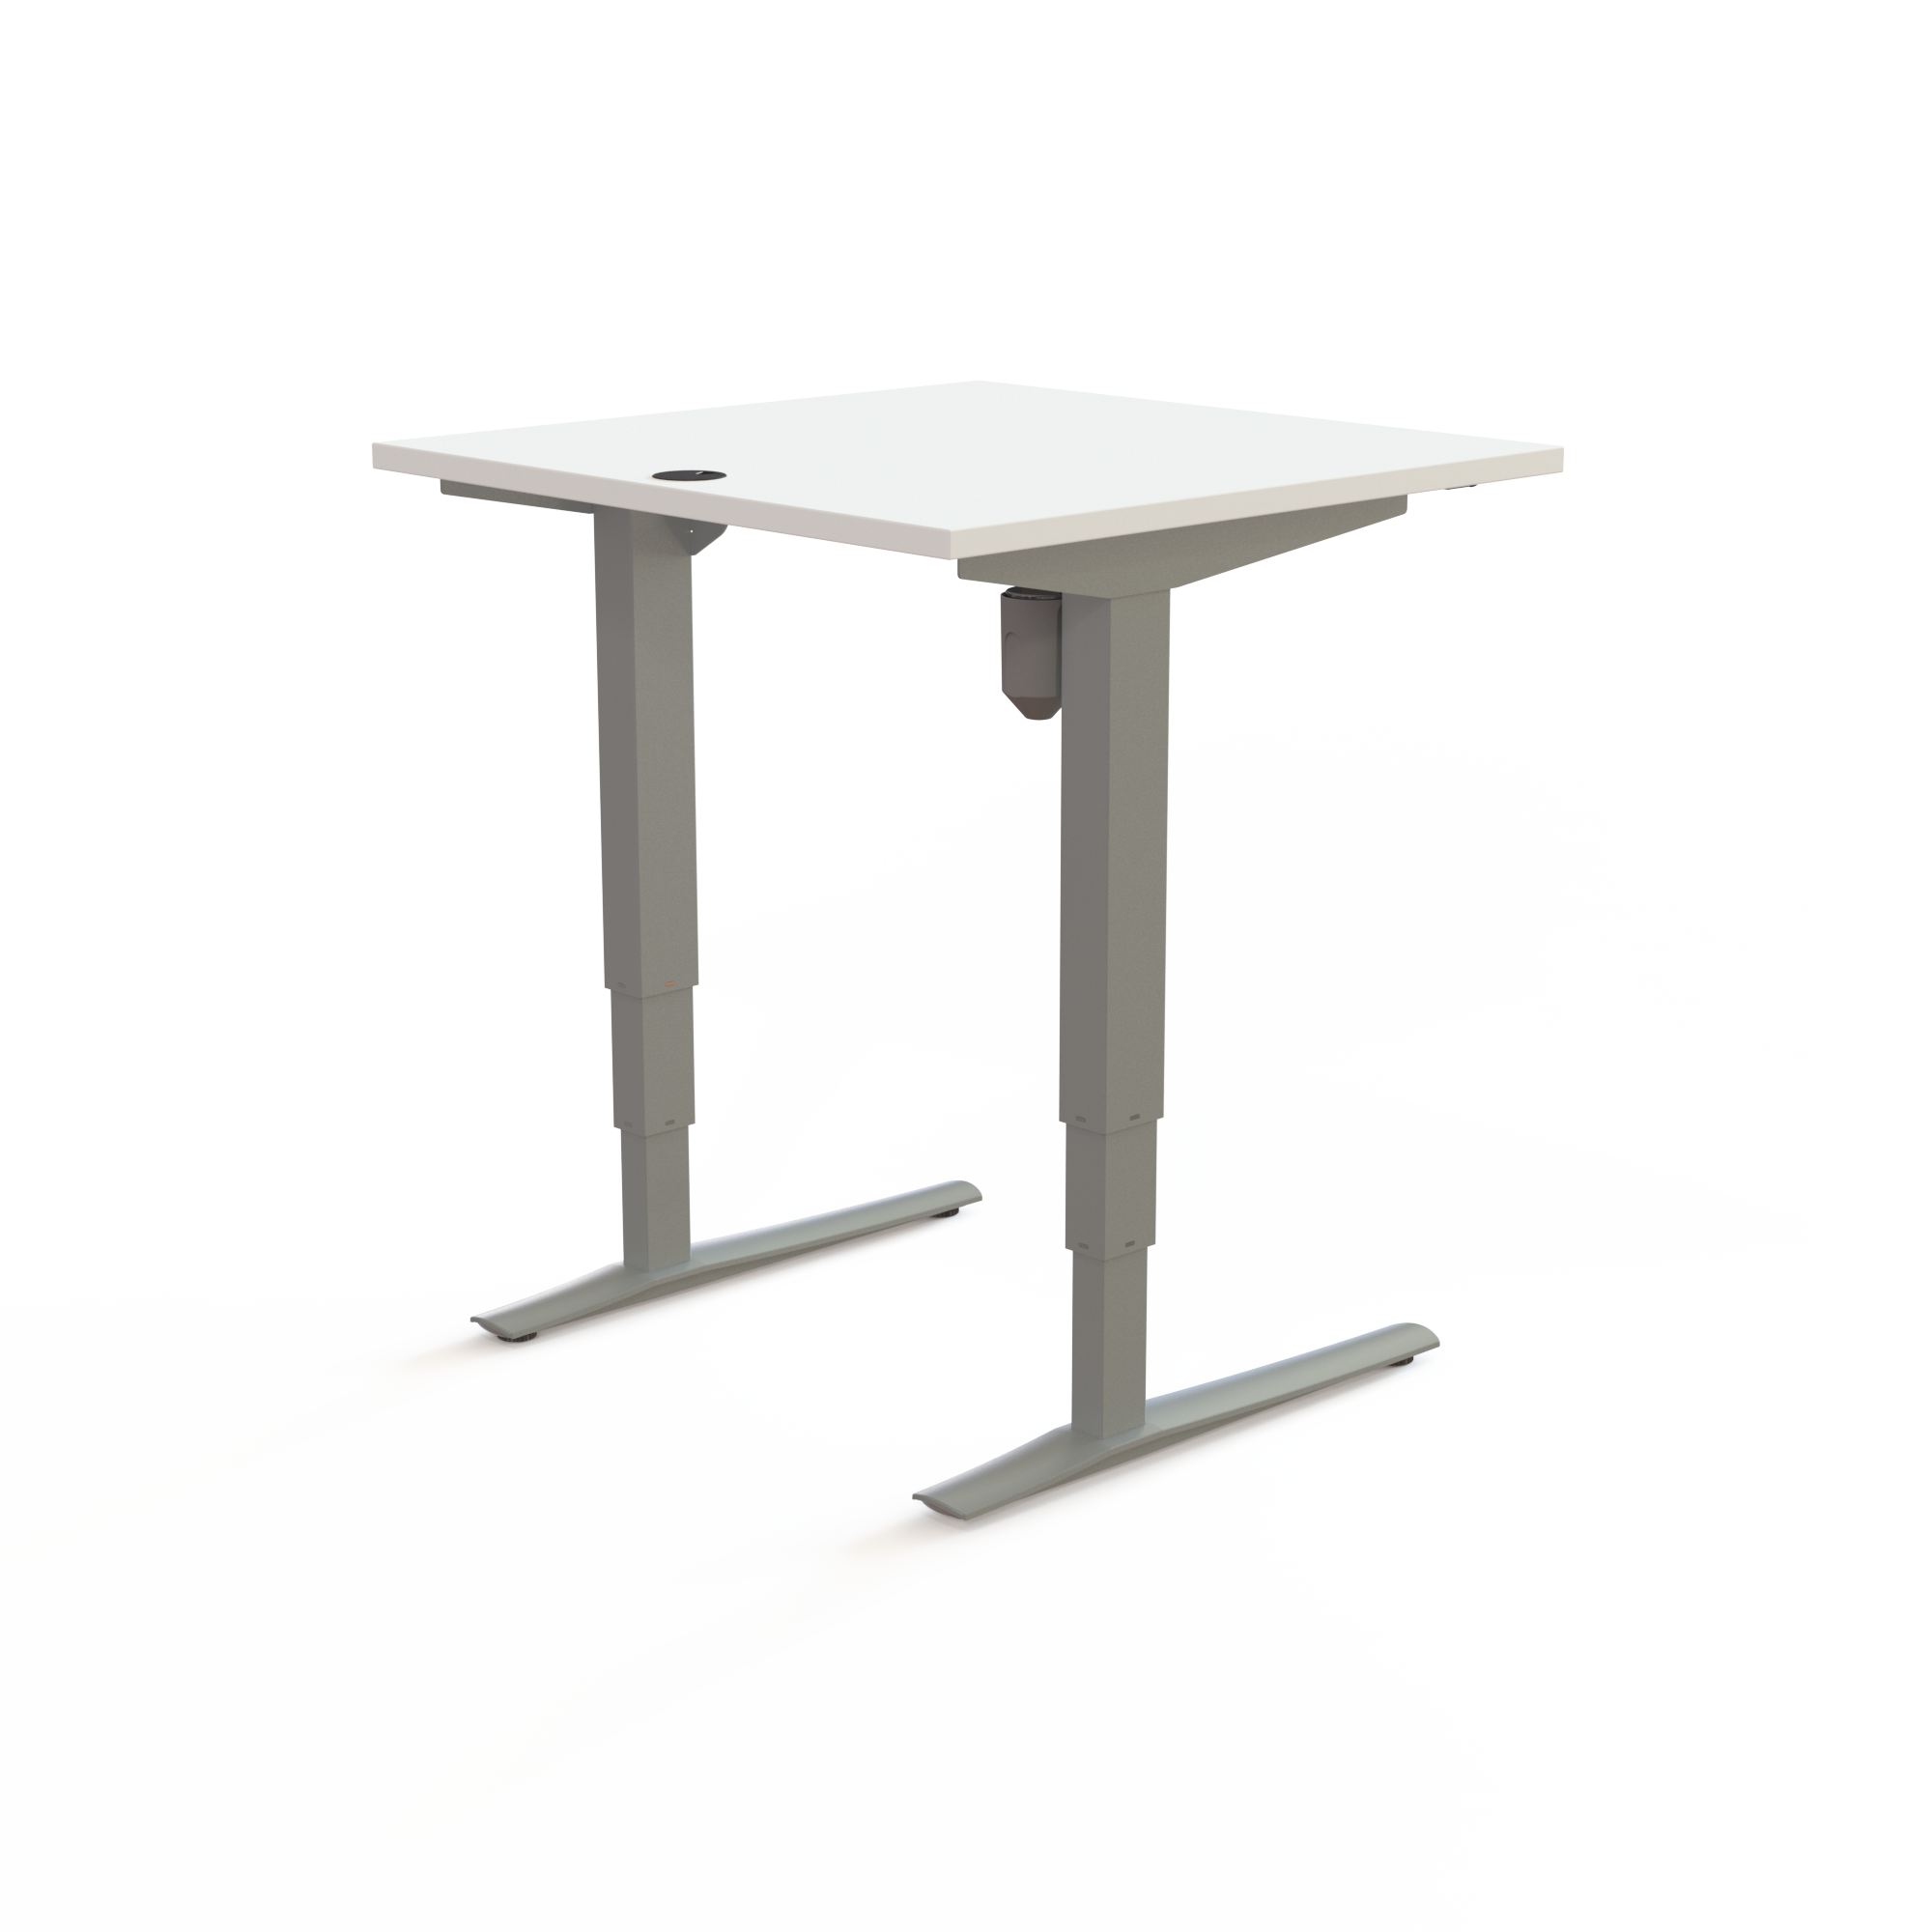 Electric Adjustable Desk | 80x80 cm | White with silver frame